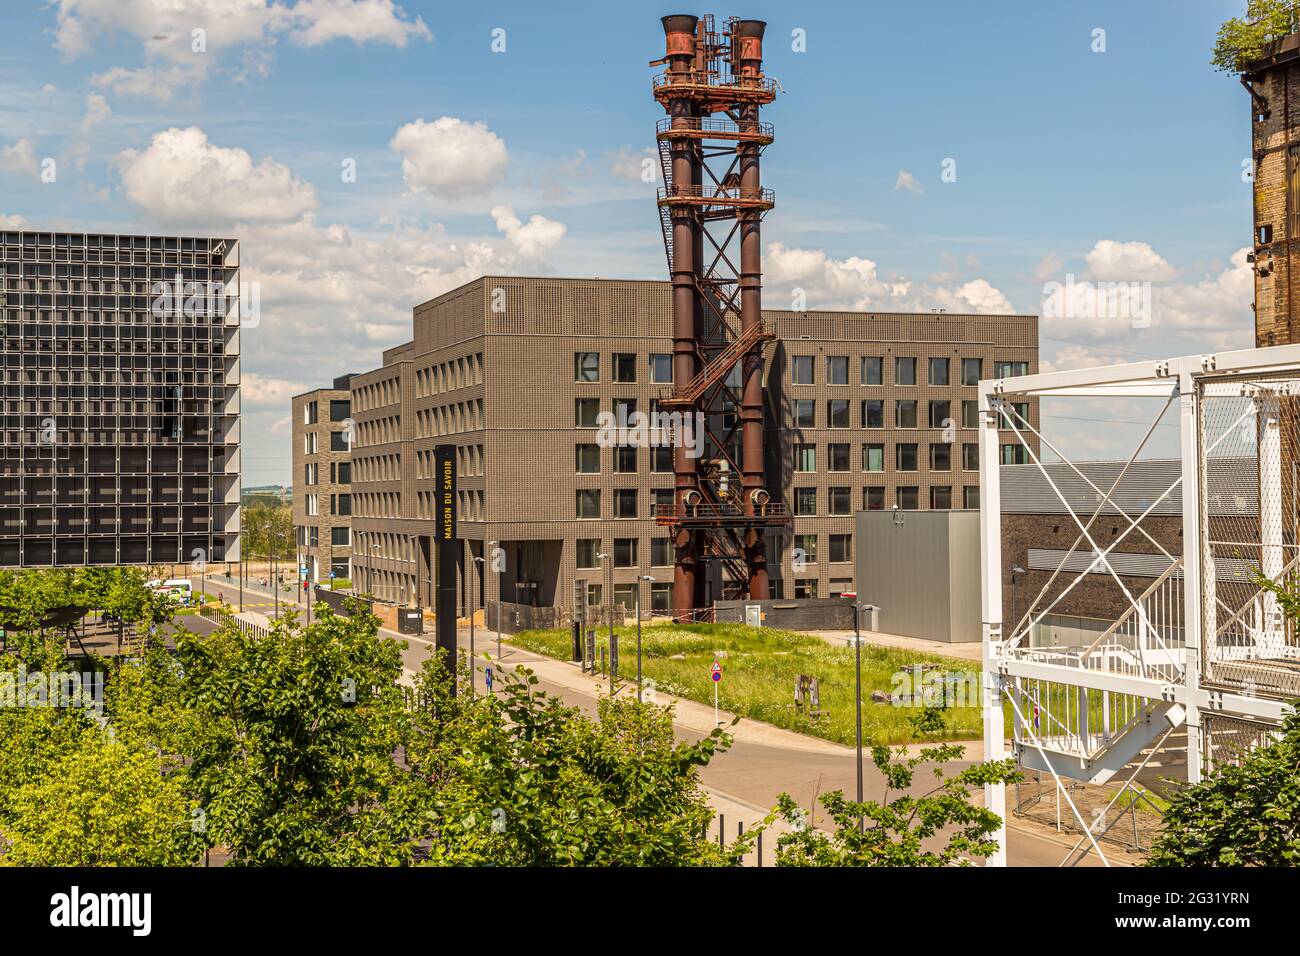 Belval Campus of the University of Luxembourg in Esch-sur-Alzette, Luxembourg Stock Photo